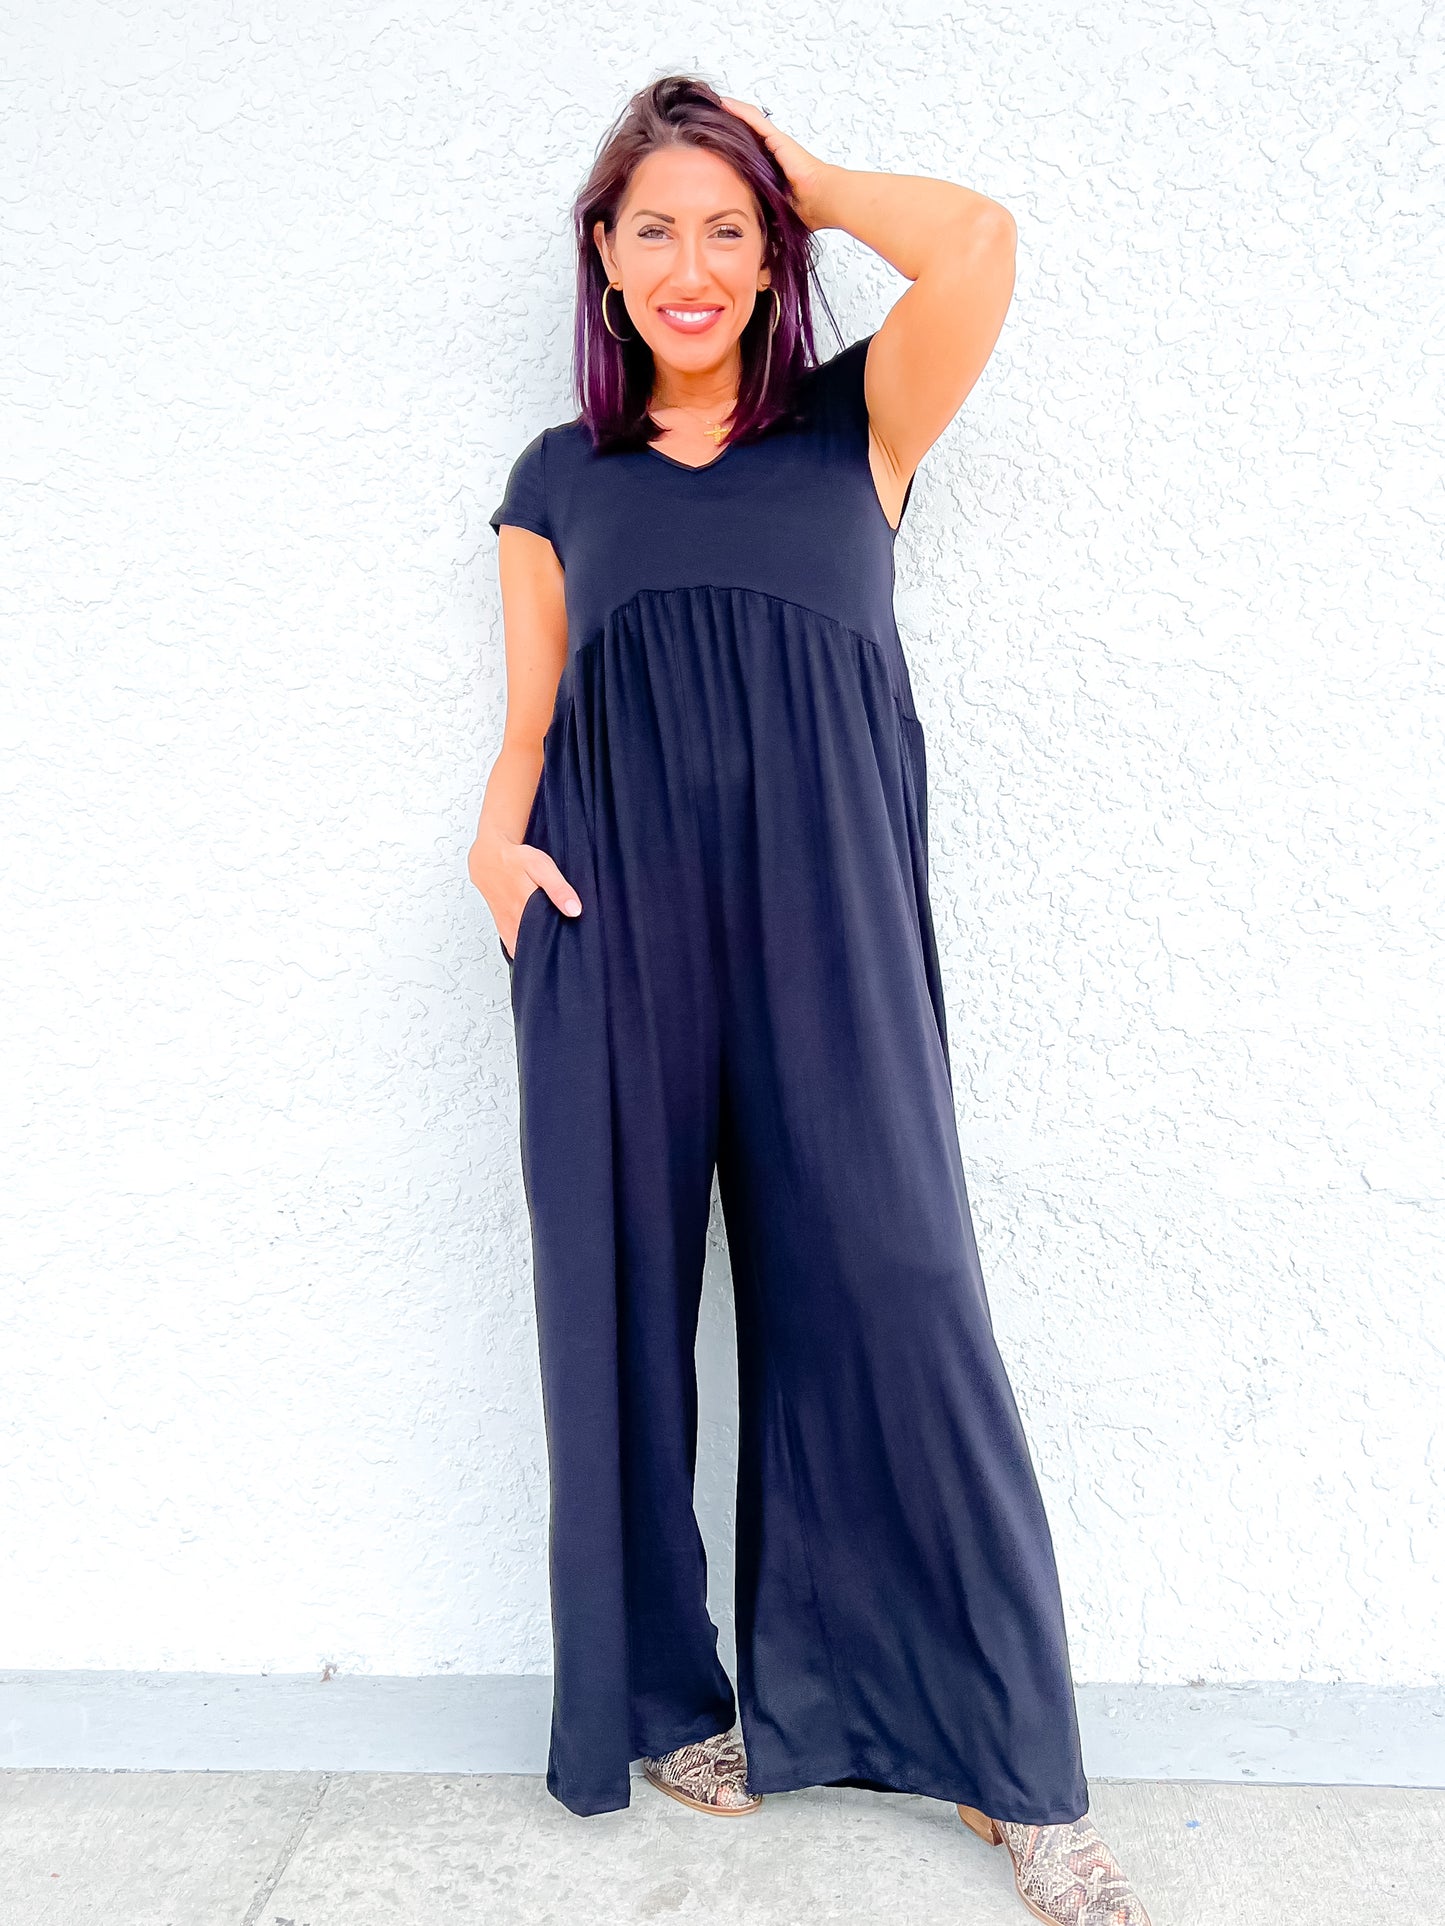 Phierce Fashions Jumper with Long Pants FINAL SALE